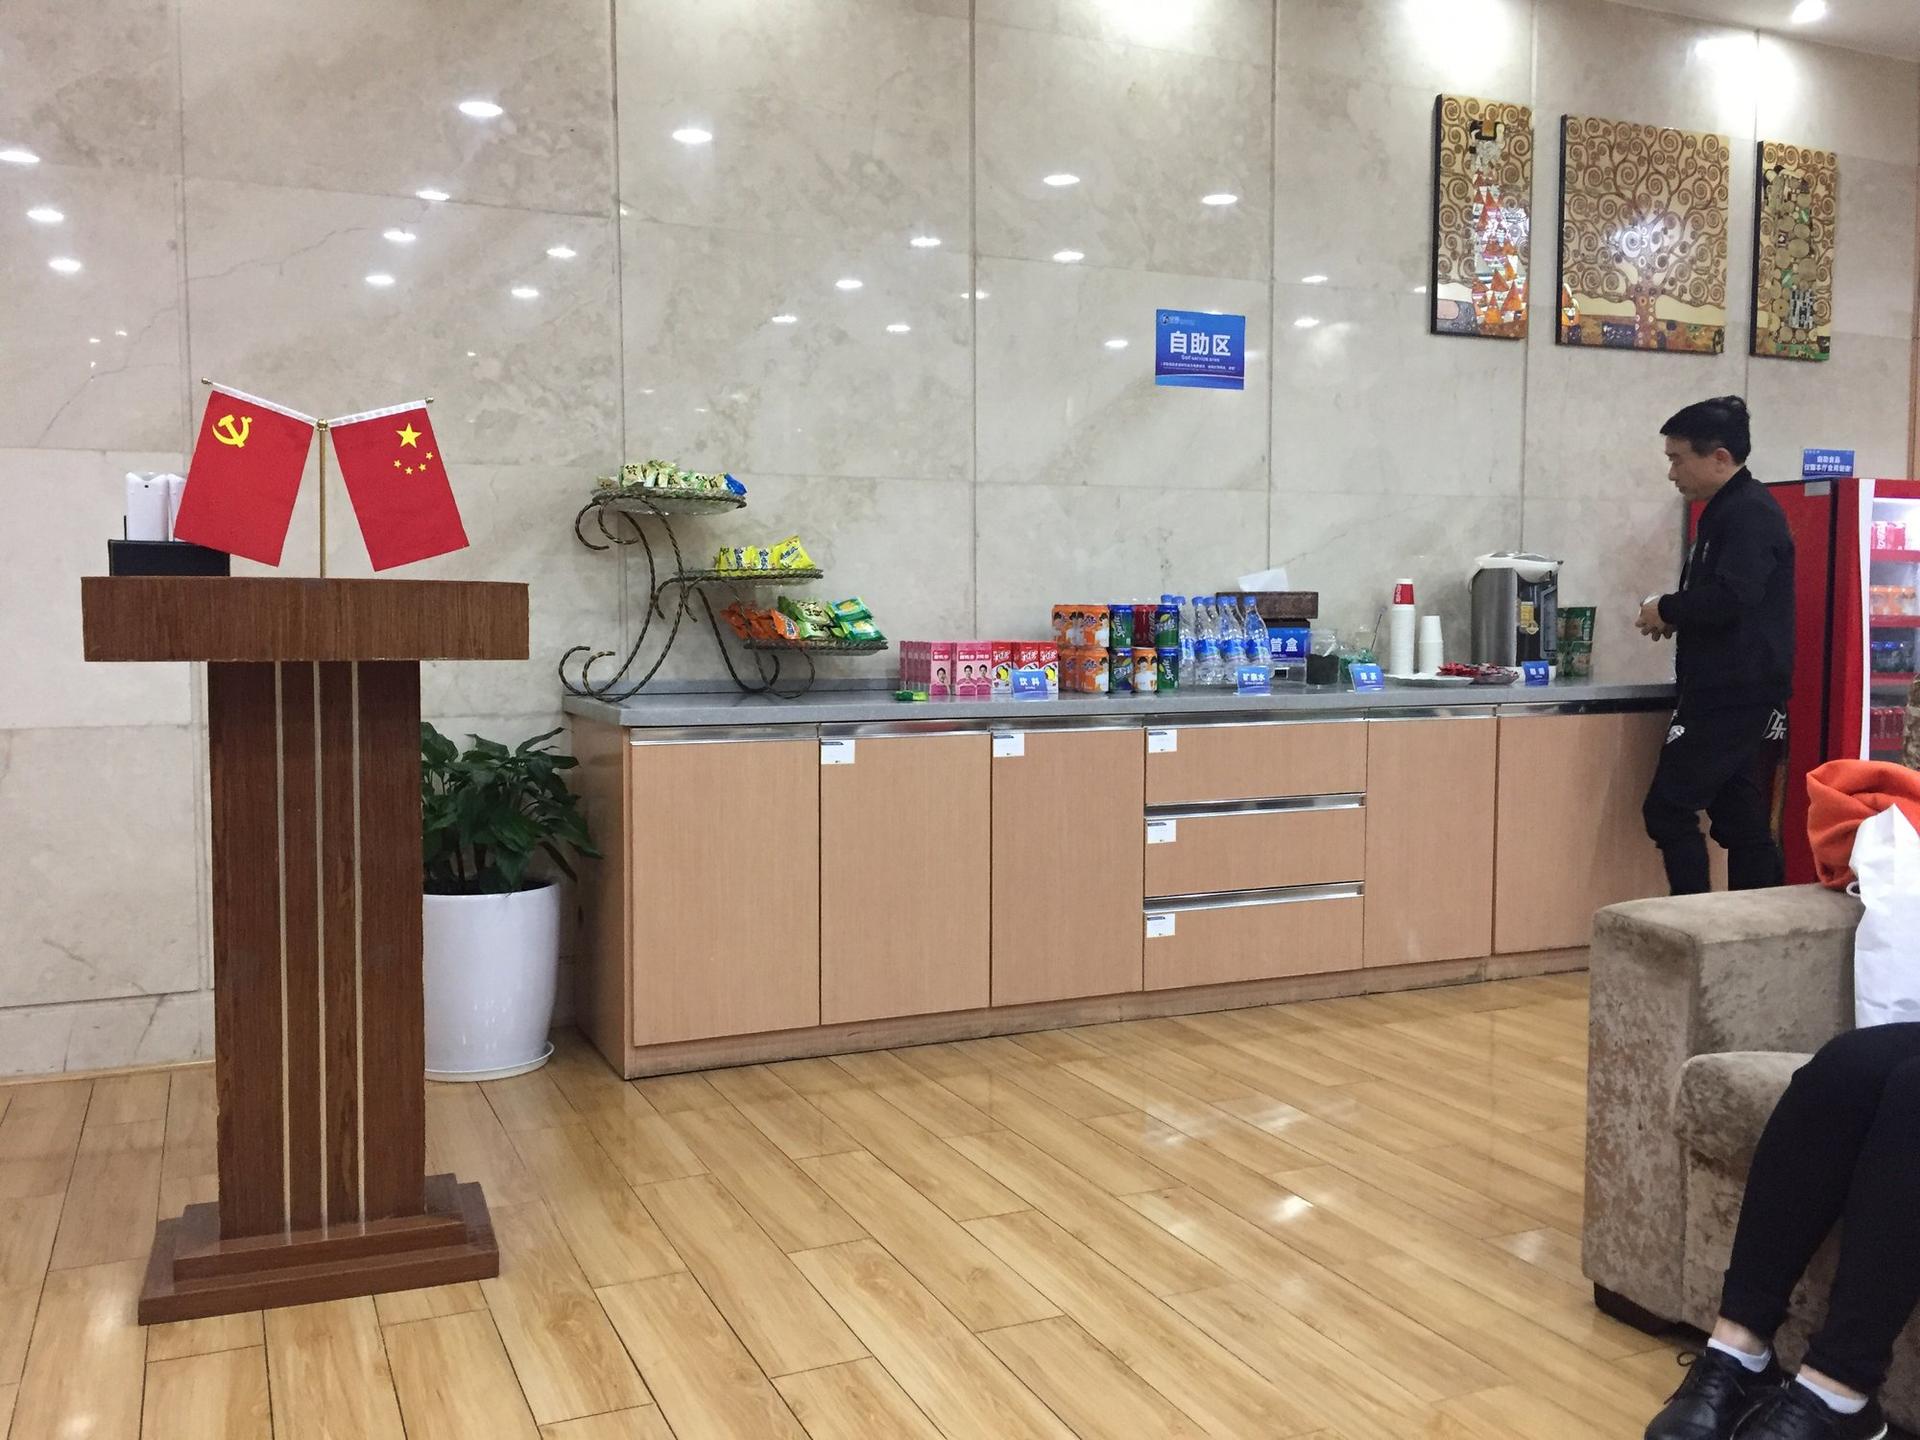 No. 3 Changsha Airport First Class Lounge (Closed For Renovation) image 1 of 1